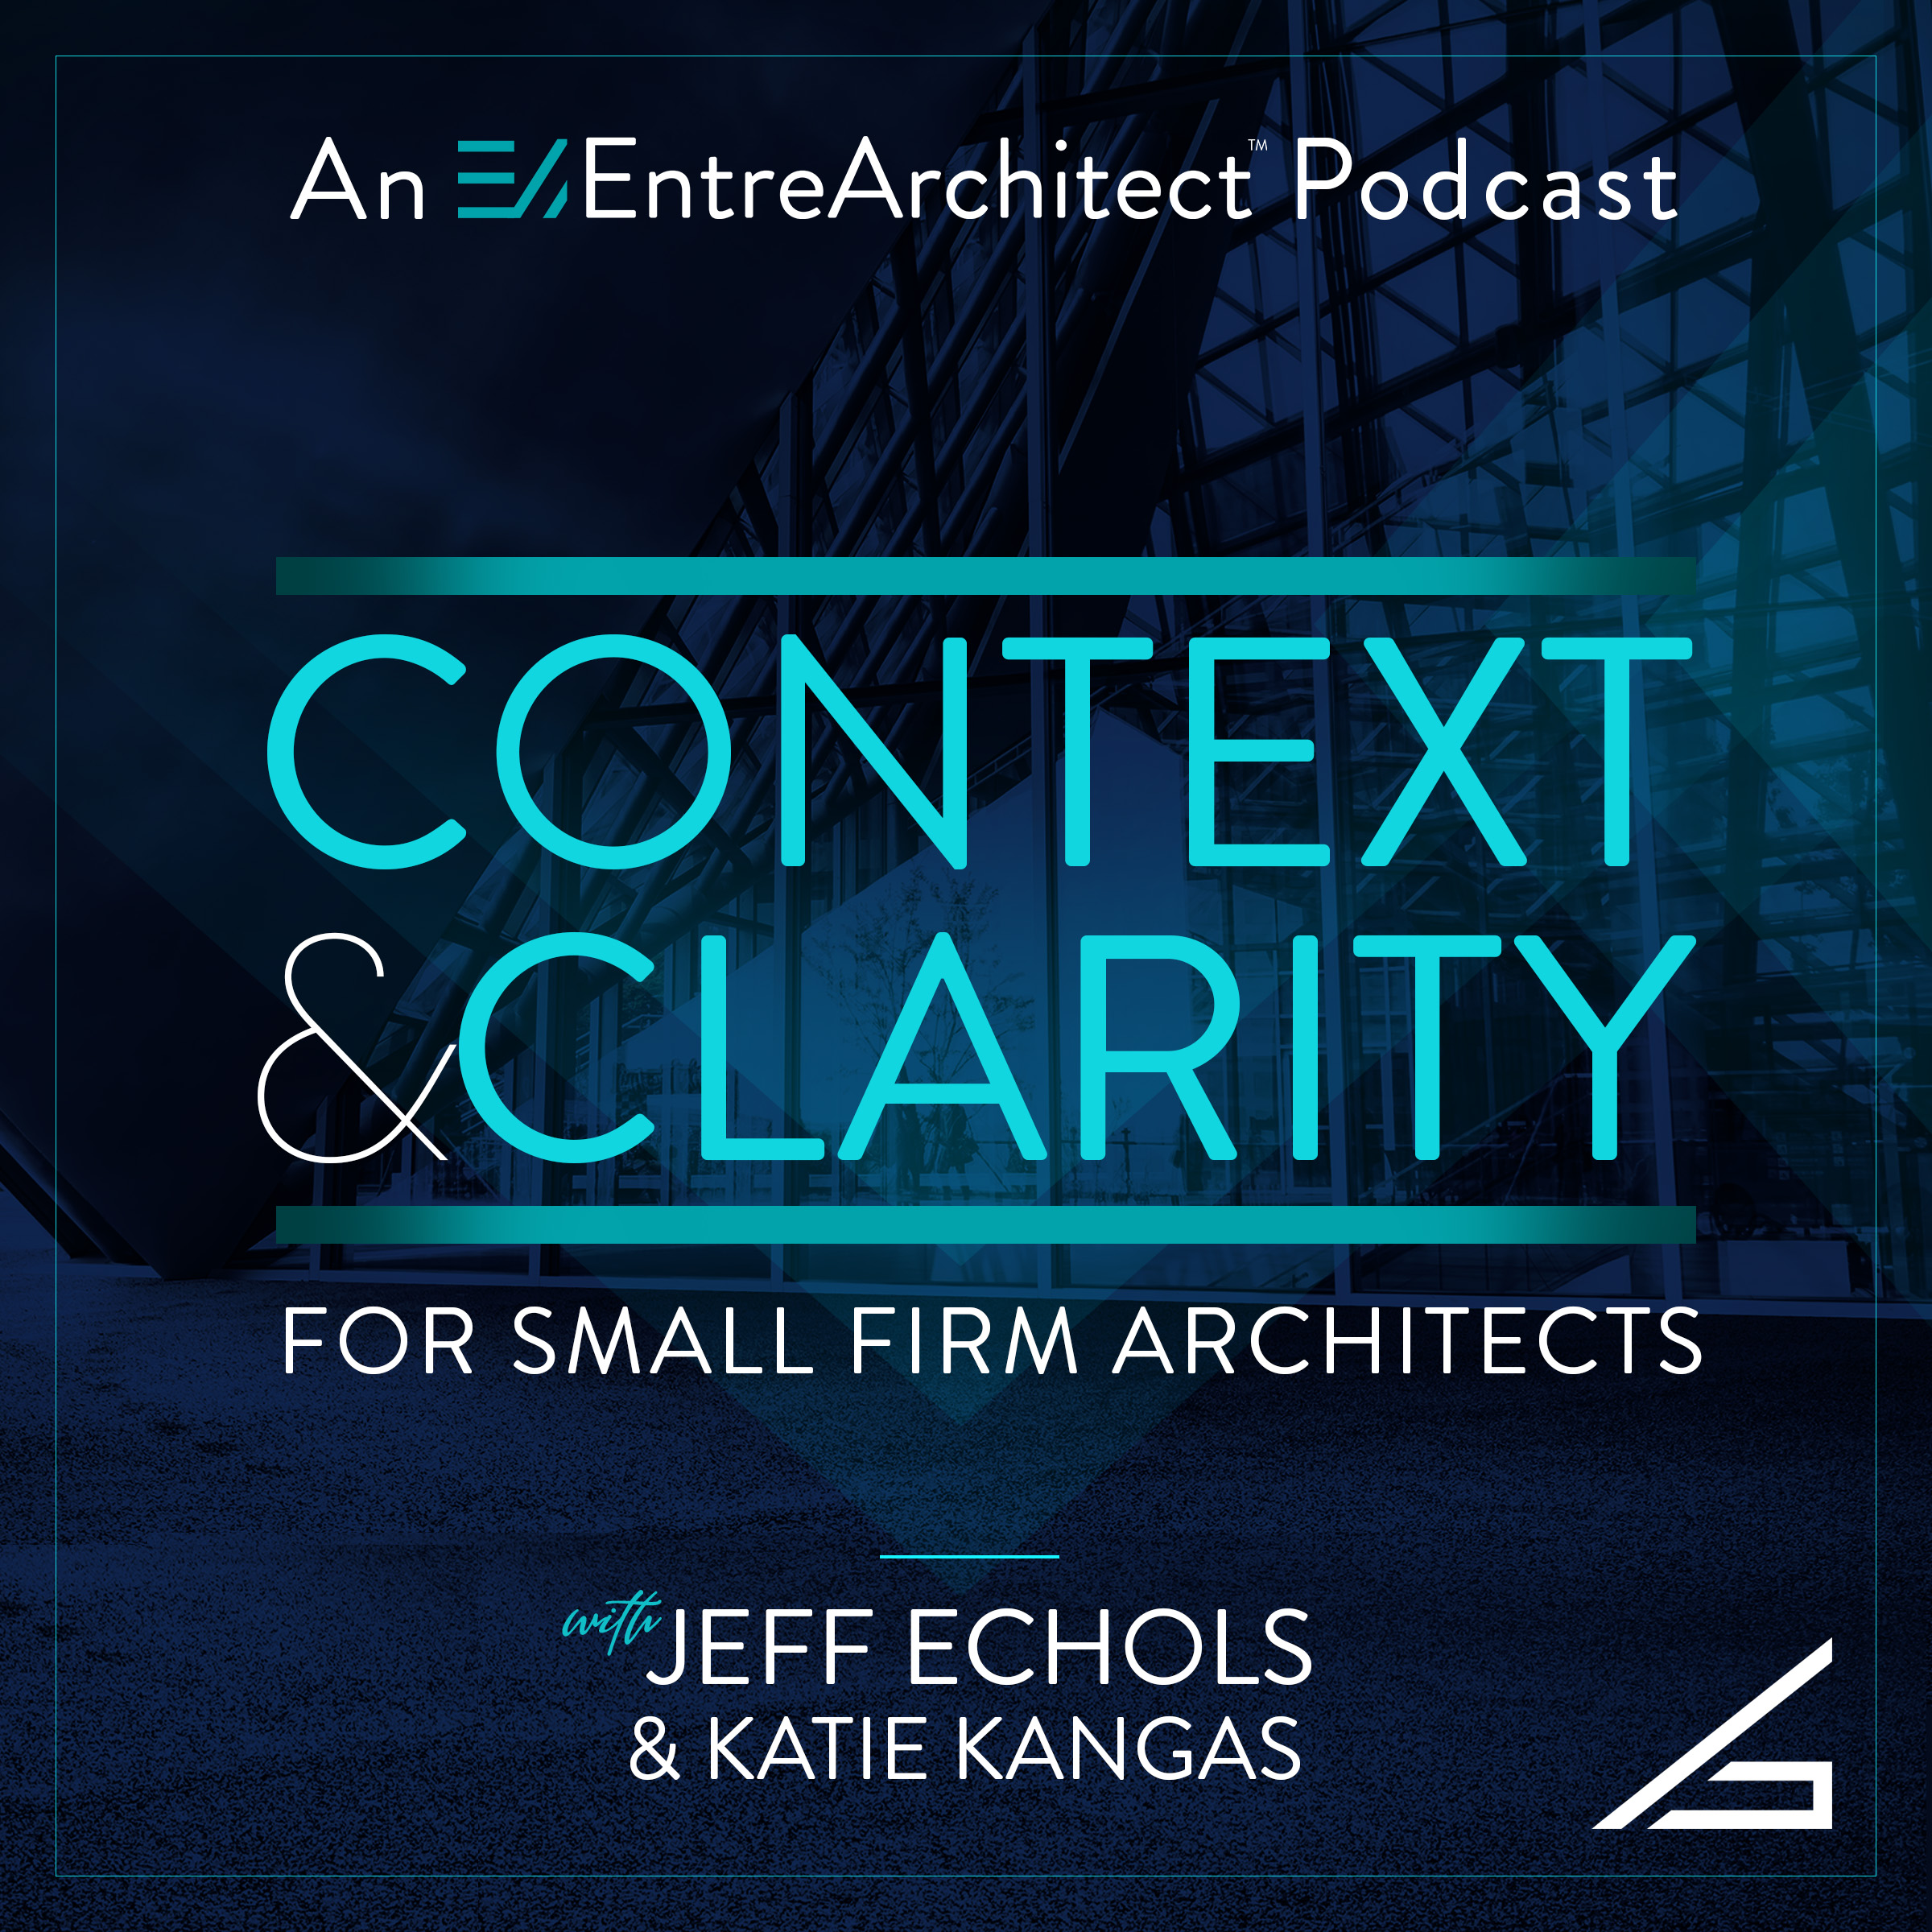 Artwork for podcast Context & Clarity for Small Firm Architects